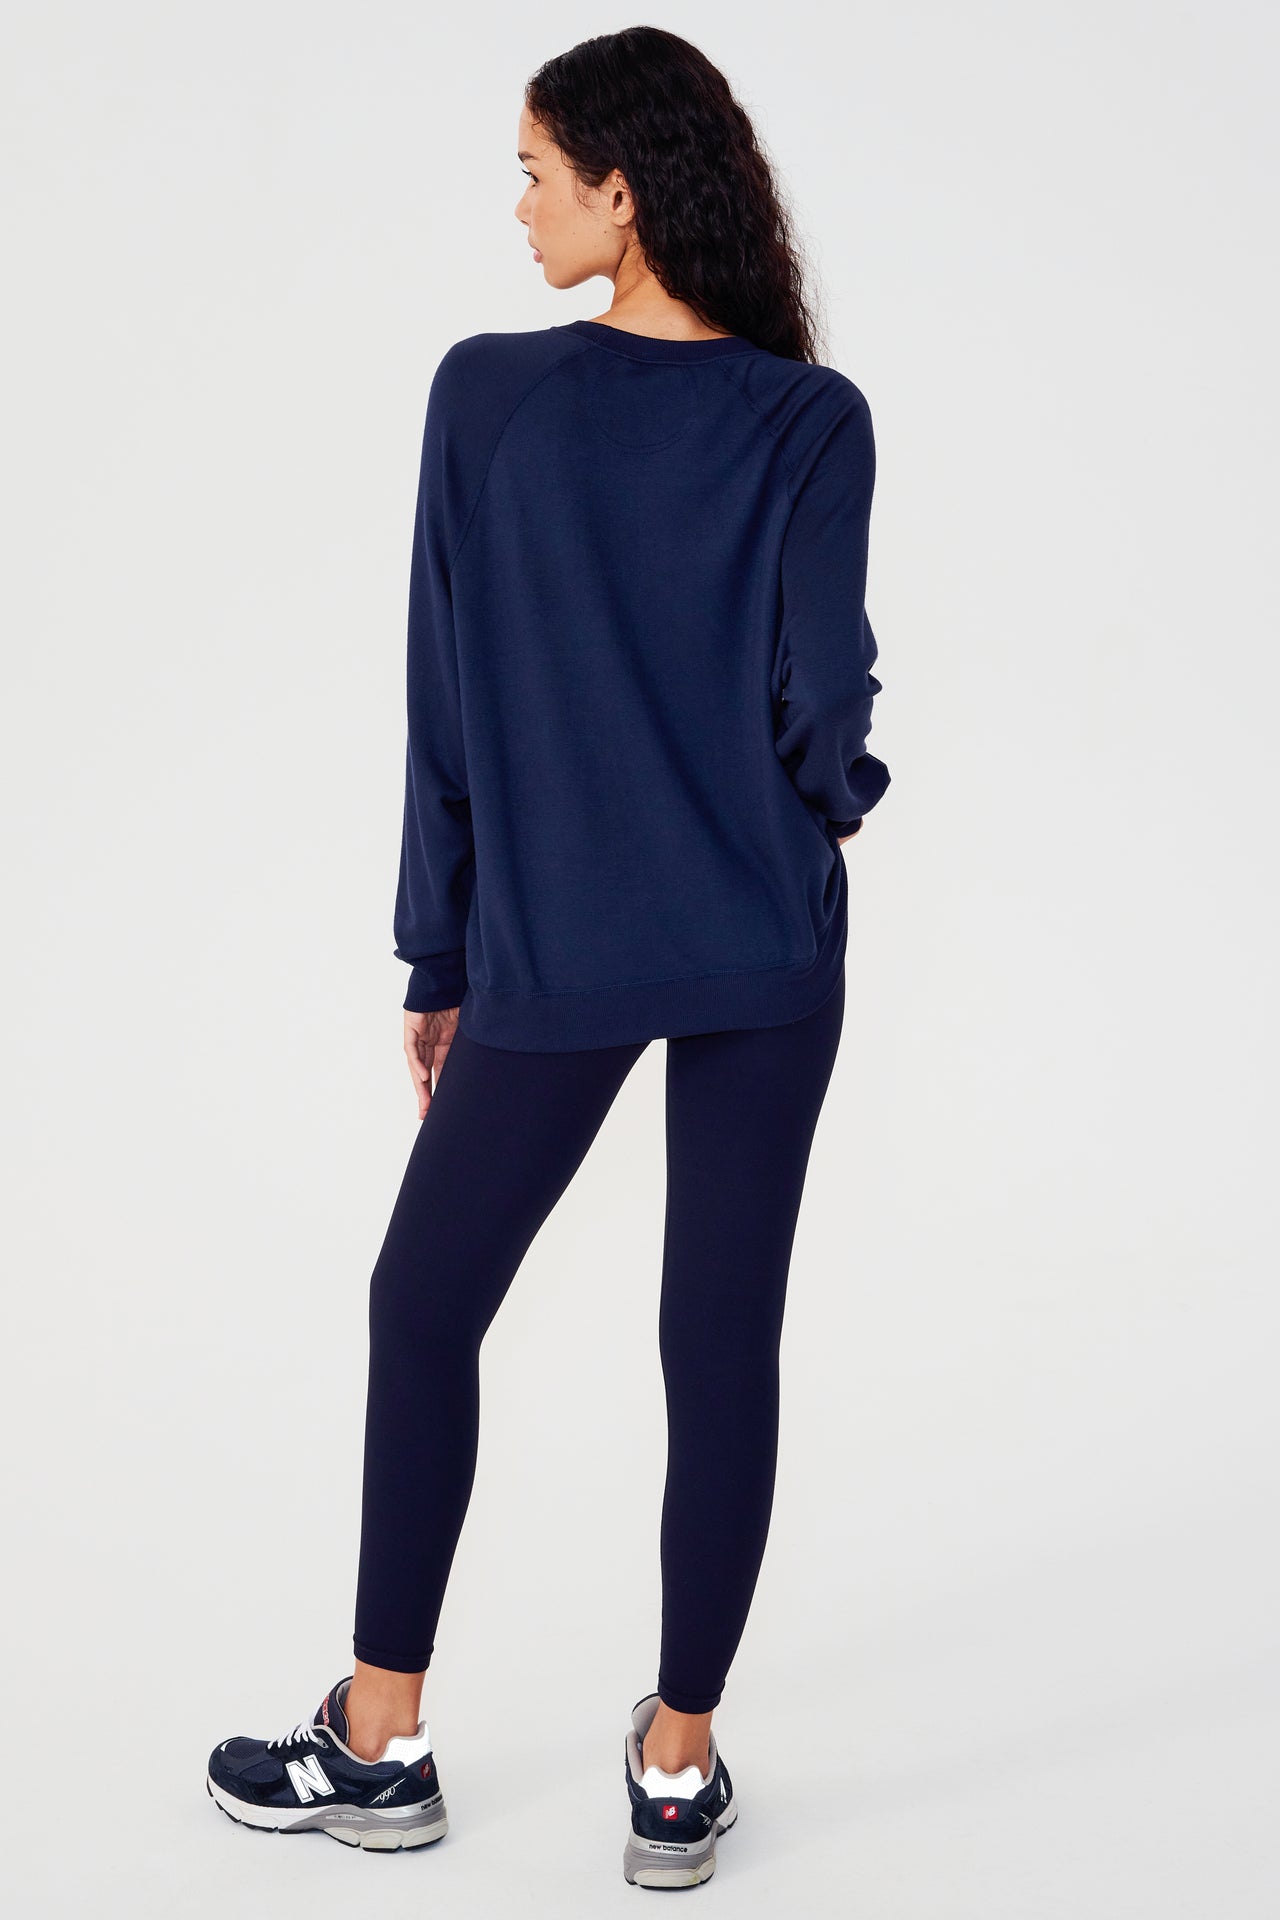 Full back view of girl wearing dark blue sweatshirt with visible stitching and ribbed hem with dark blue leggings and dark blue shoes